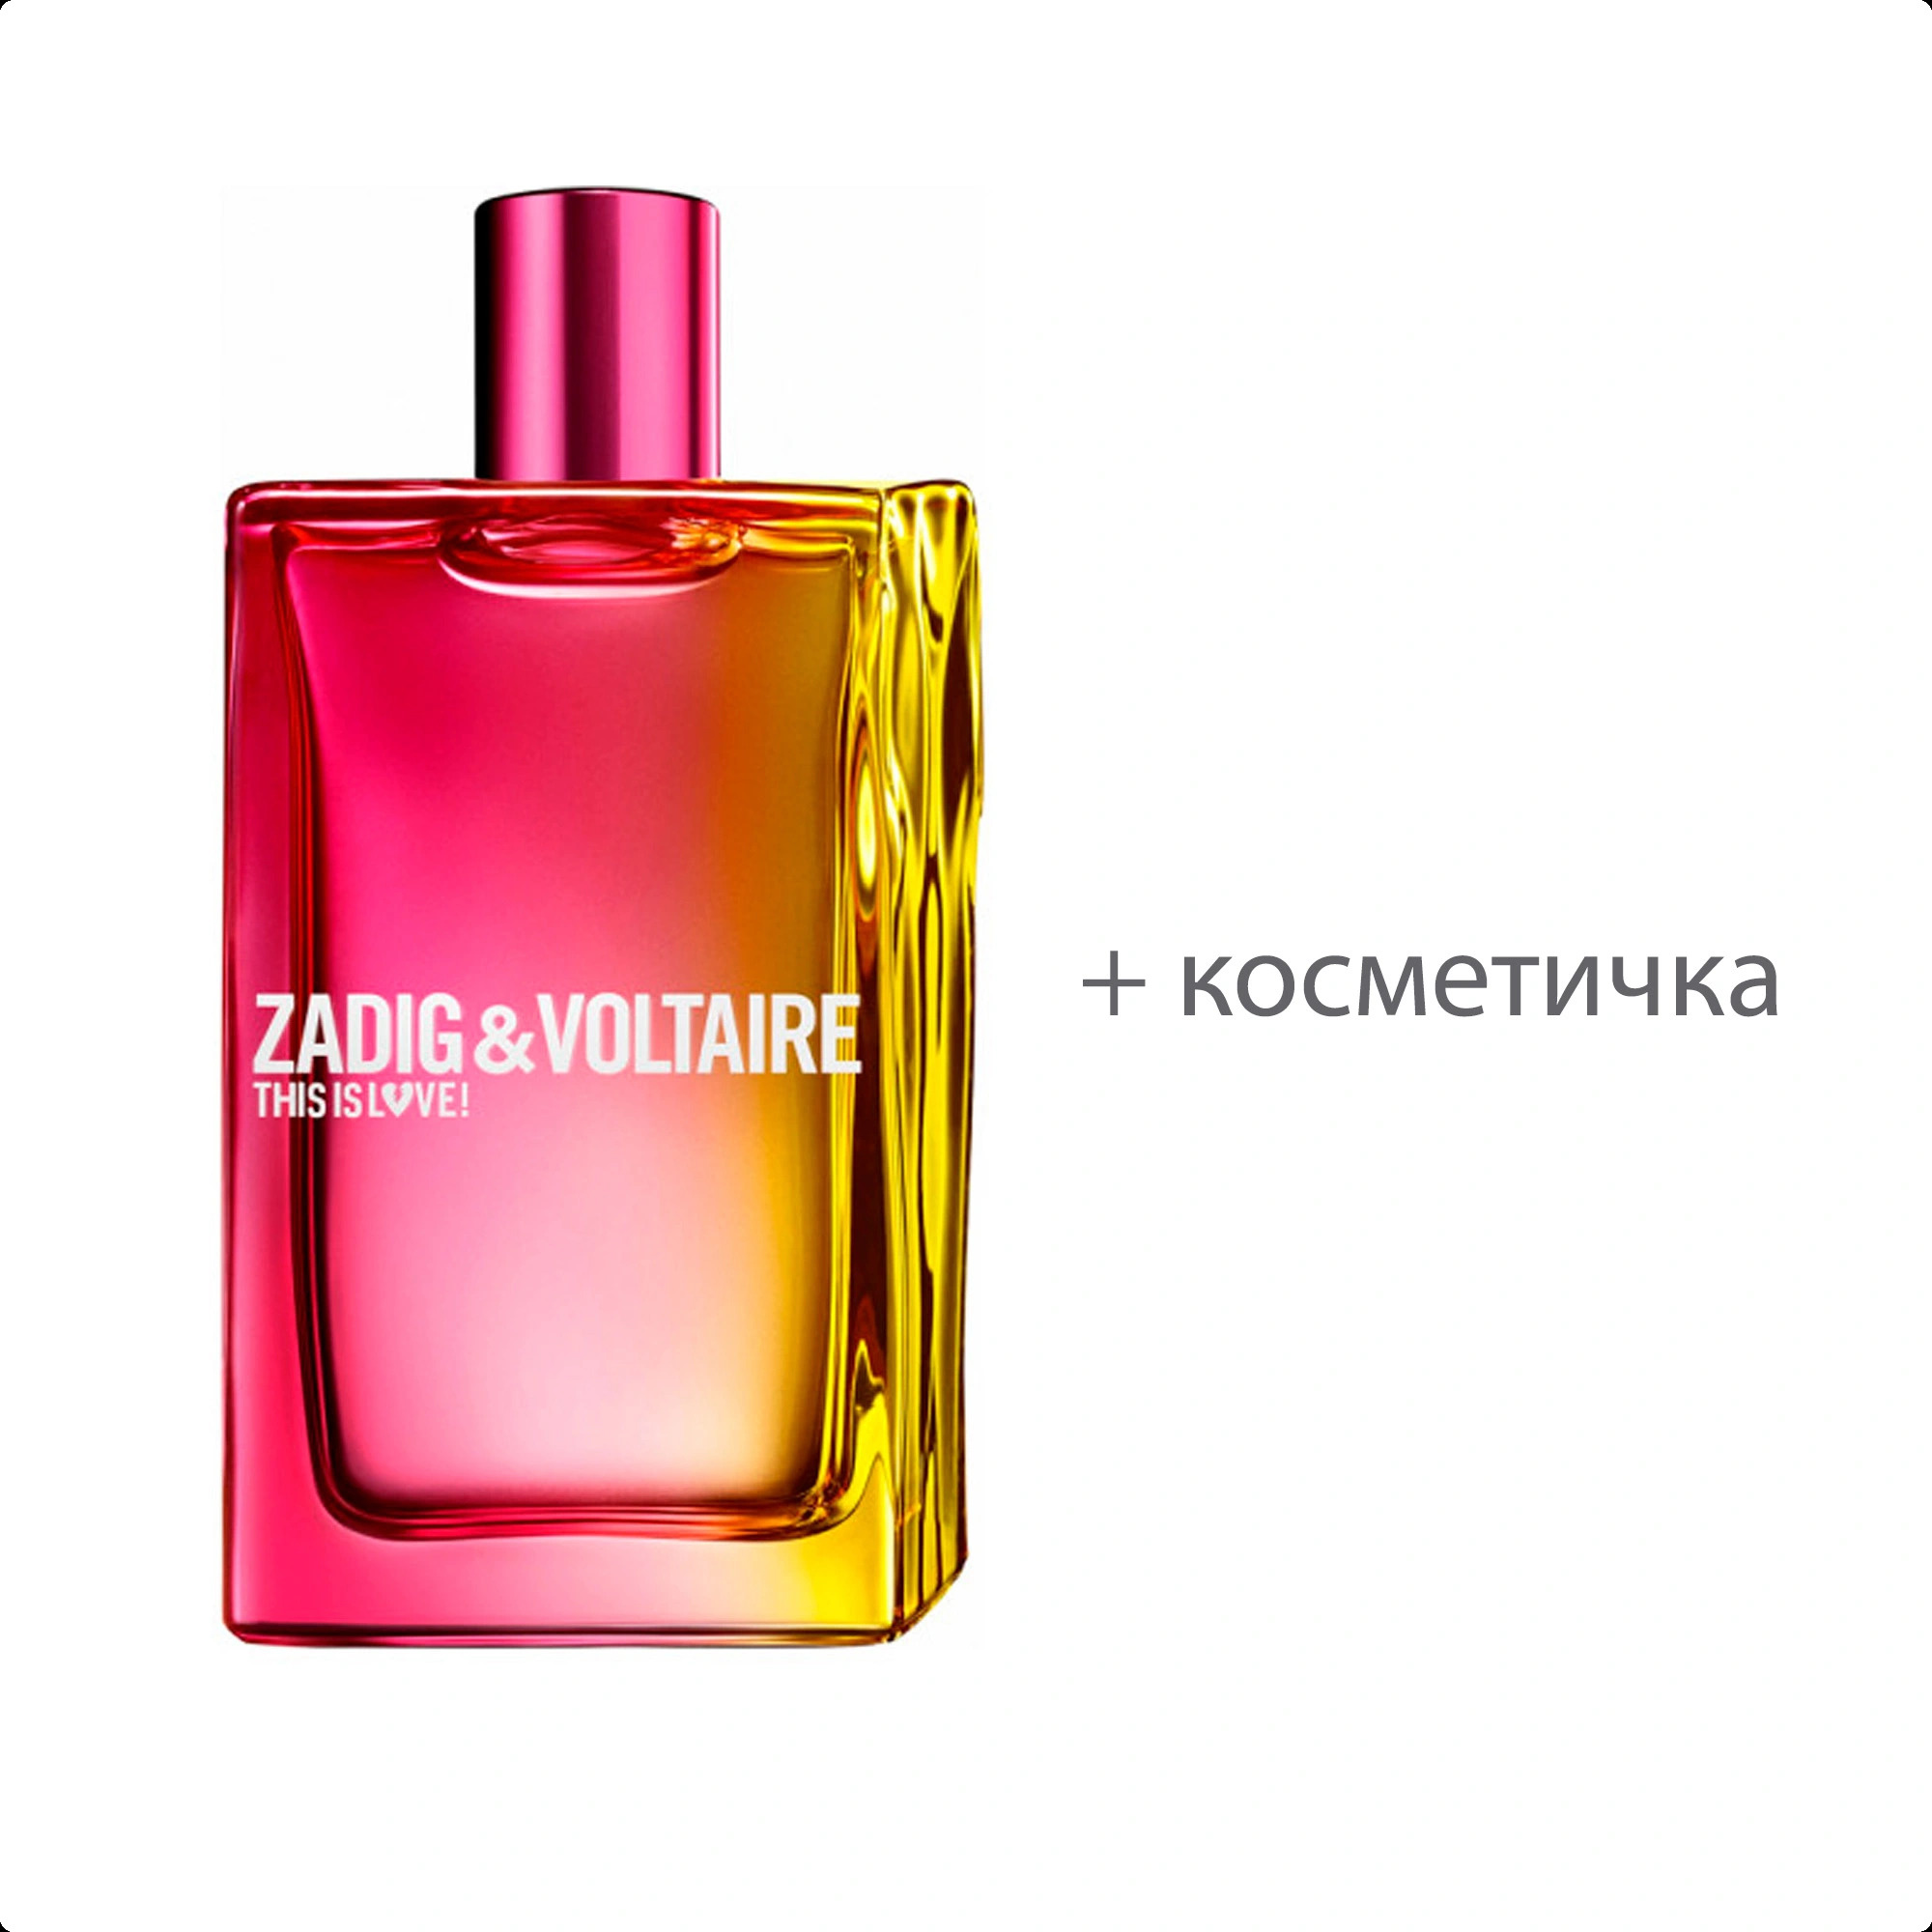 Zadig & Voltaire This Is Love For Her Набор (парфюмерная вода 50 мл + косметичка) для женщин